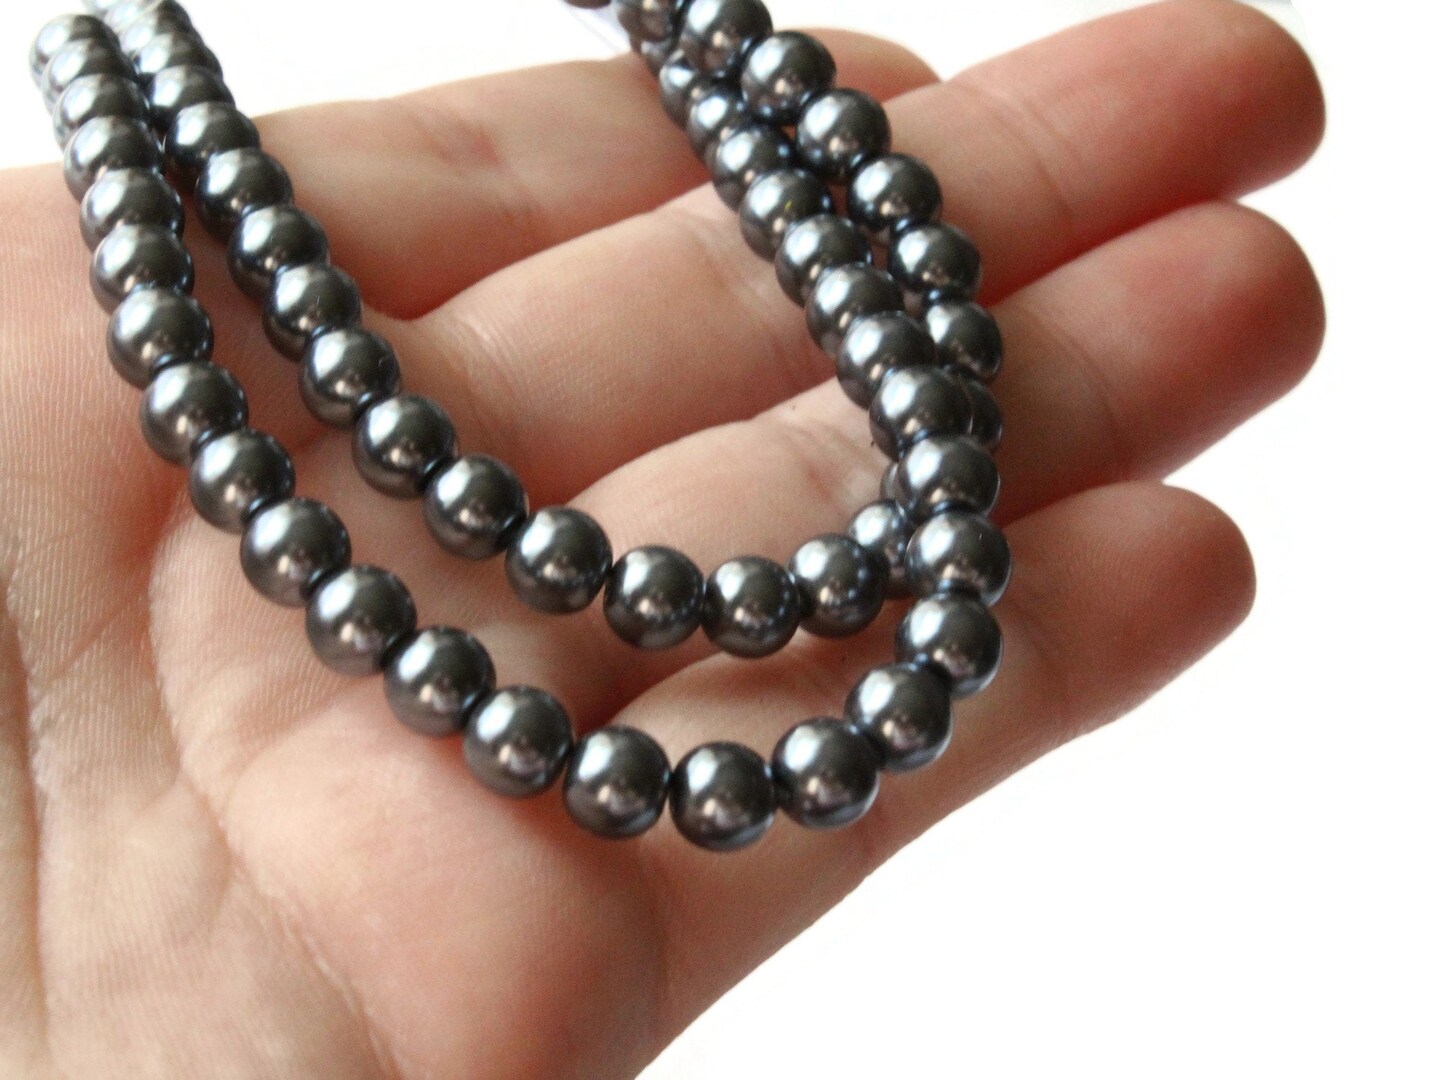 72 6mm Gray Glass Faux Pearls Round Beads